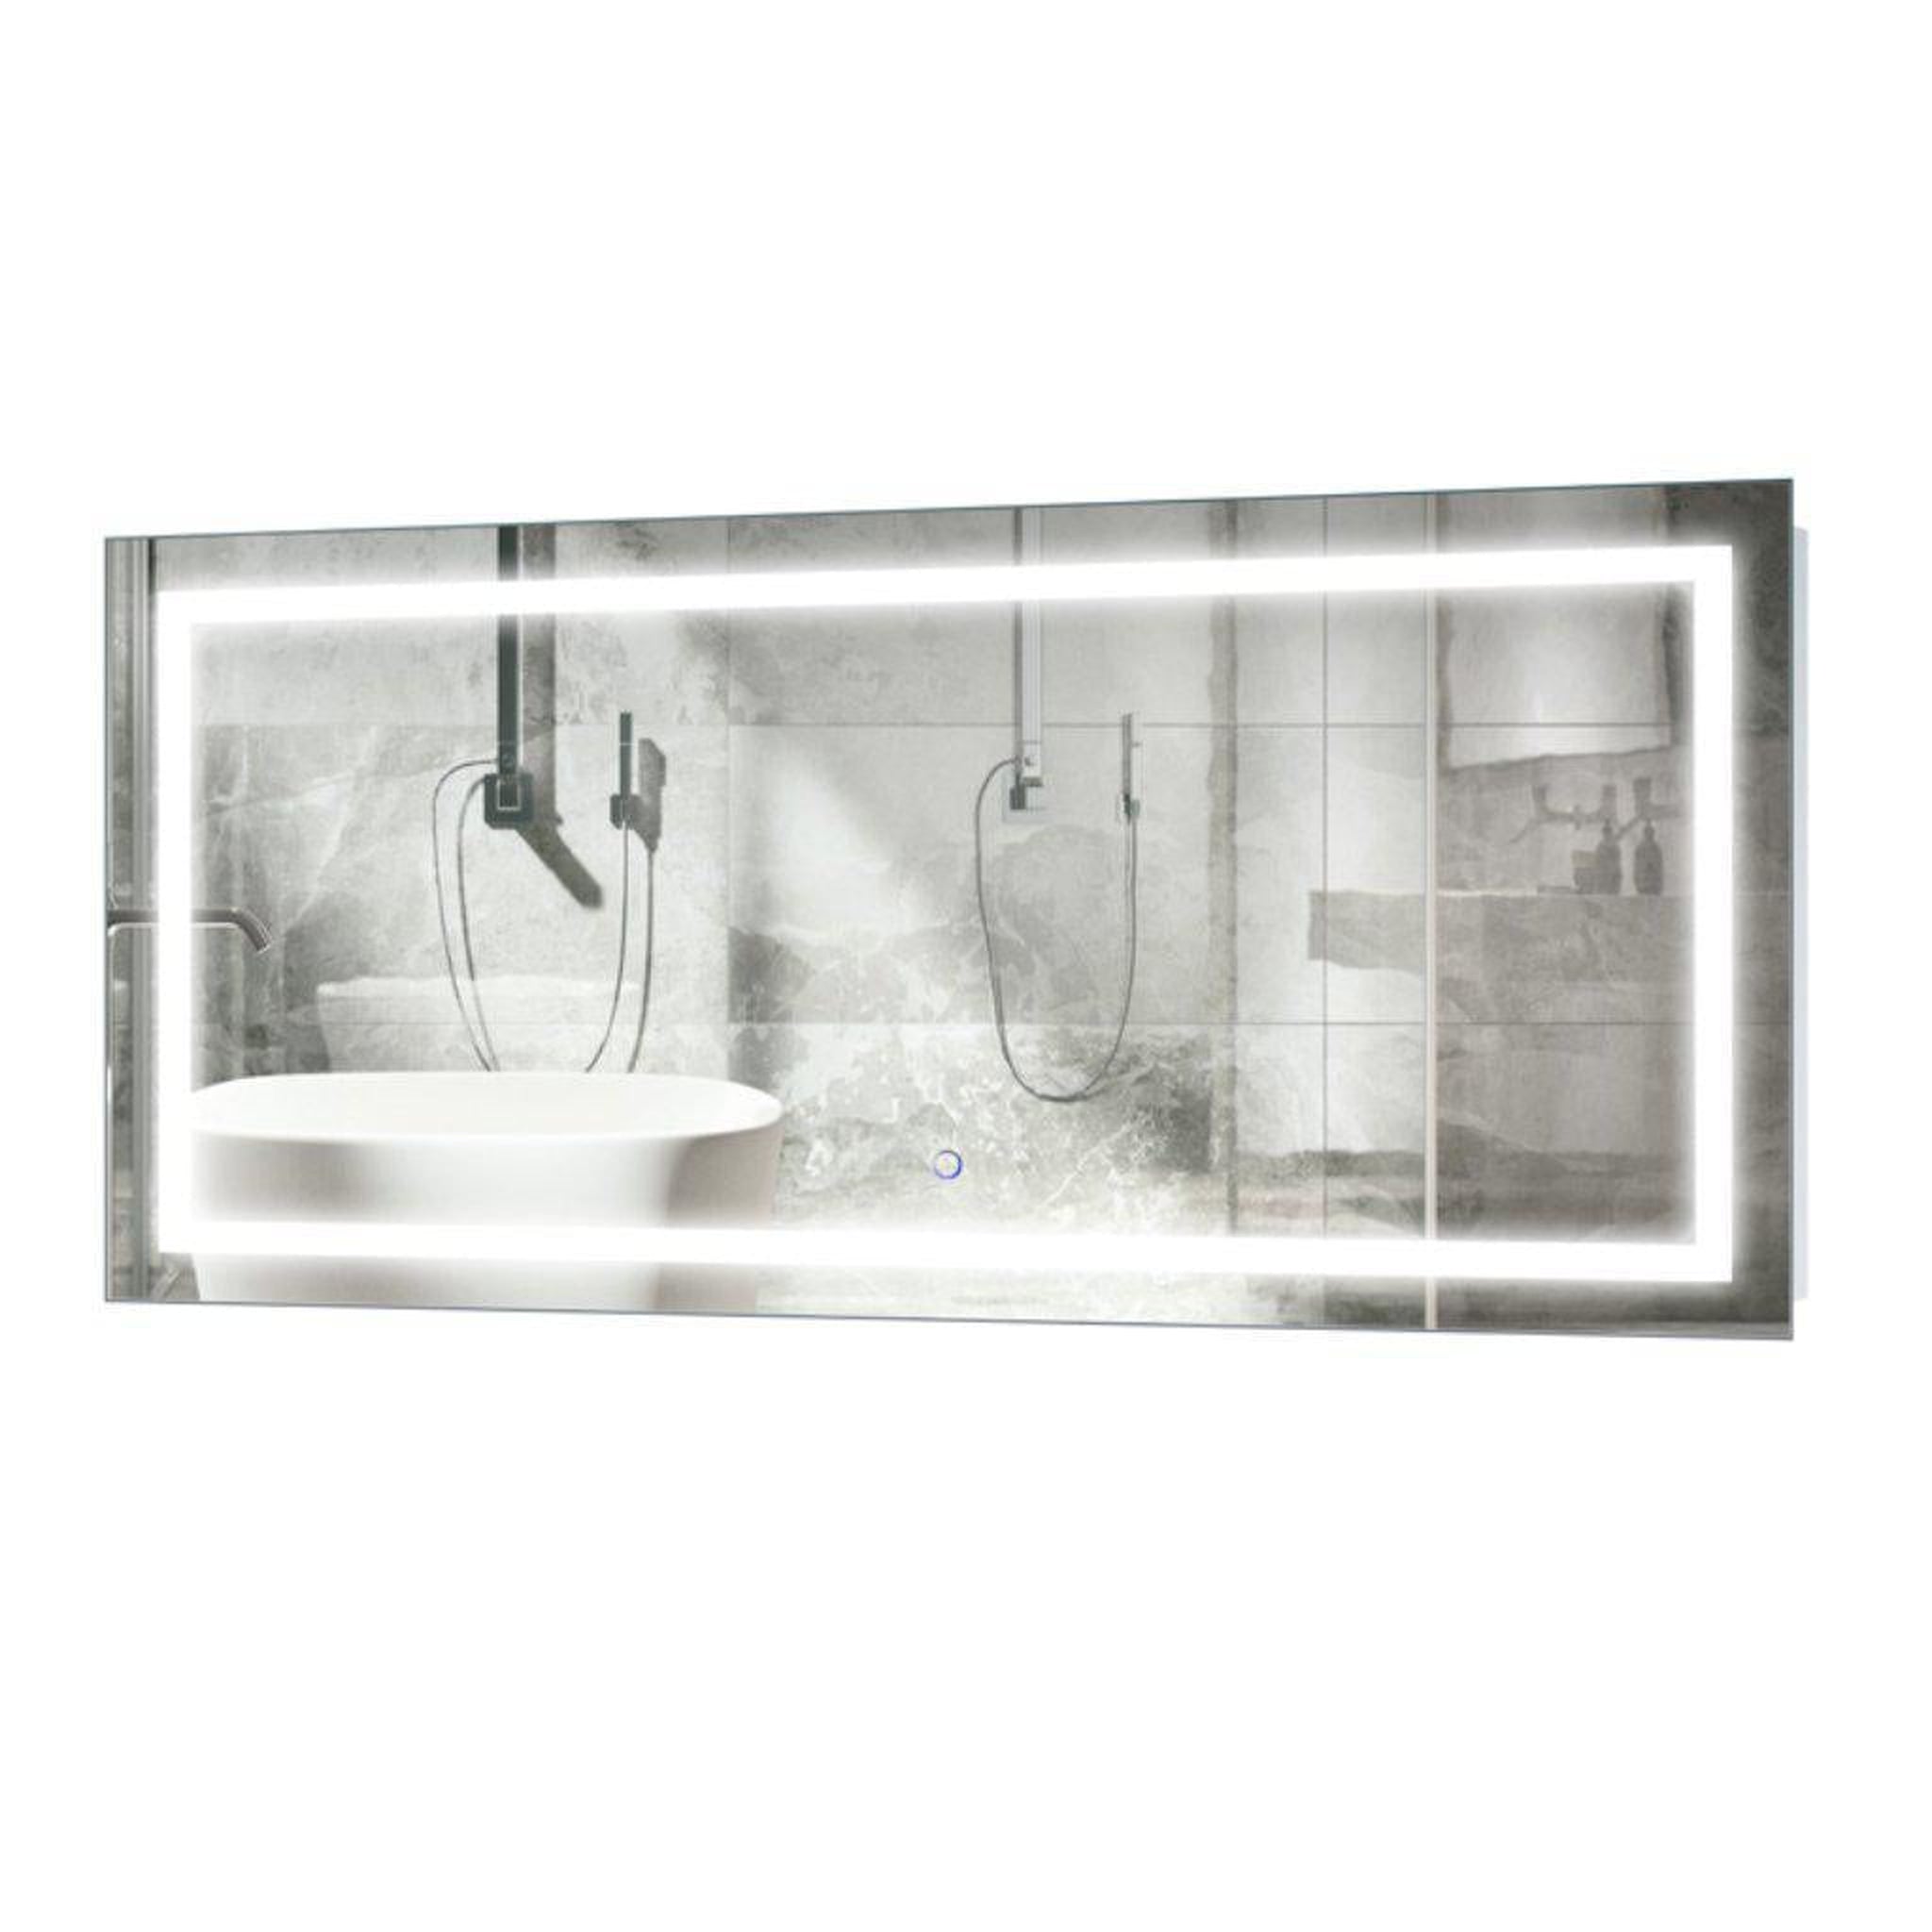 Krugg Reflections, Krugg Reflections Icon 48” x 24” 5000K Rectangular Wall-Mounted Illuminated Silver Backed LED Mirror With Built-in Defogger and Touch Sensor On/Off Built-in Dimmer